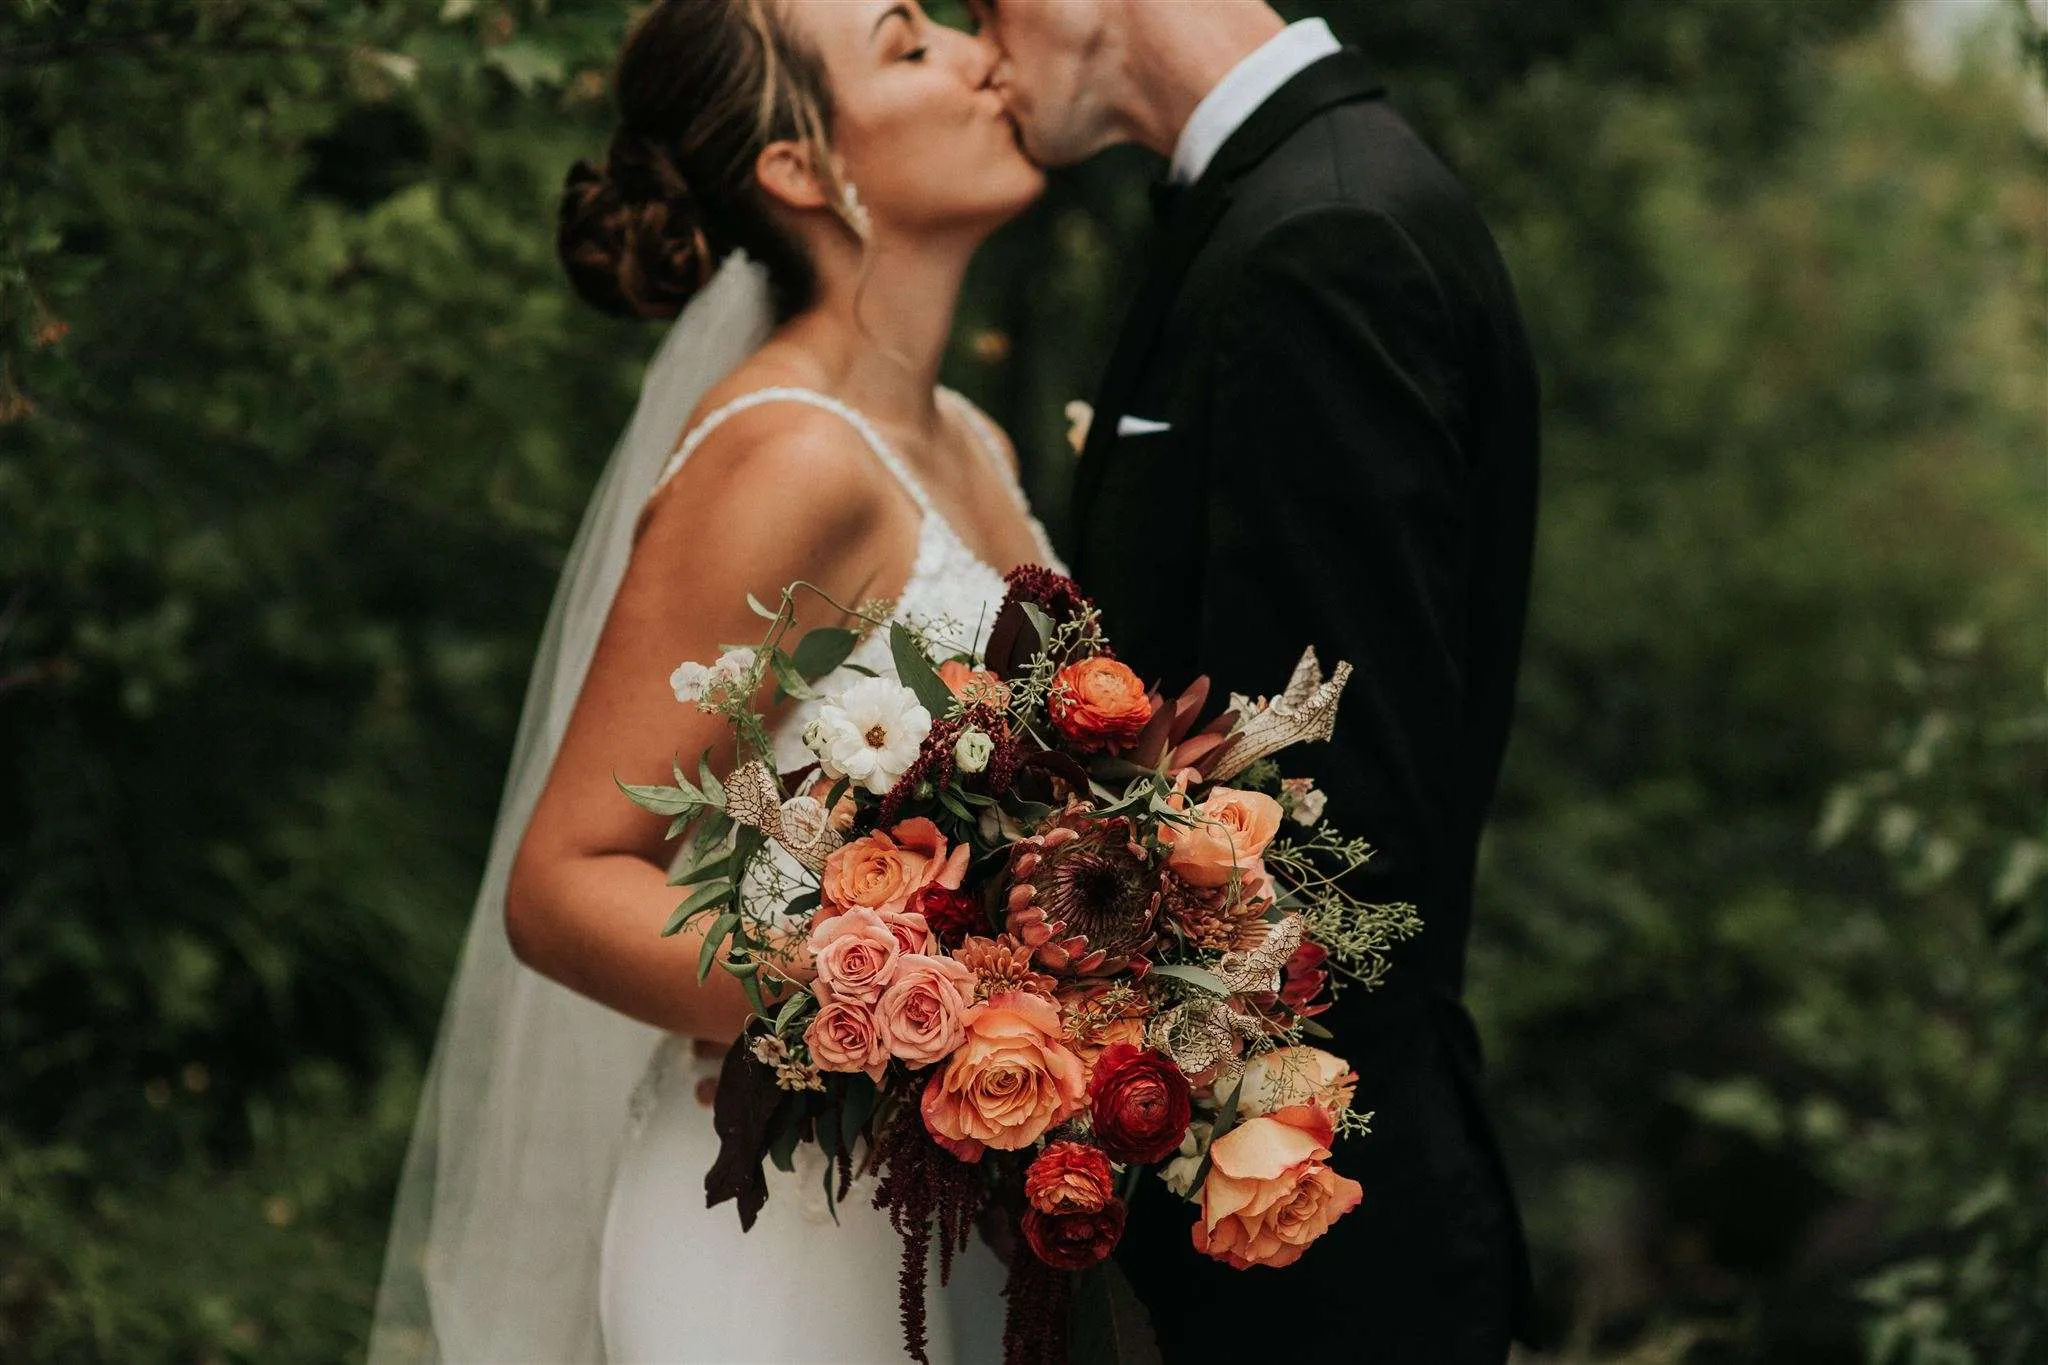 A bride and groom kissing